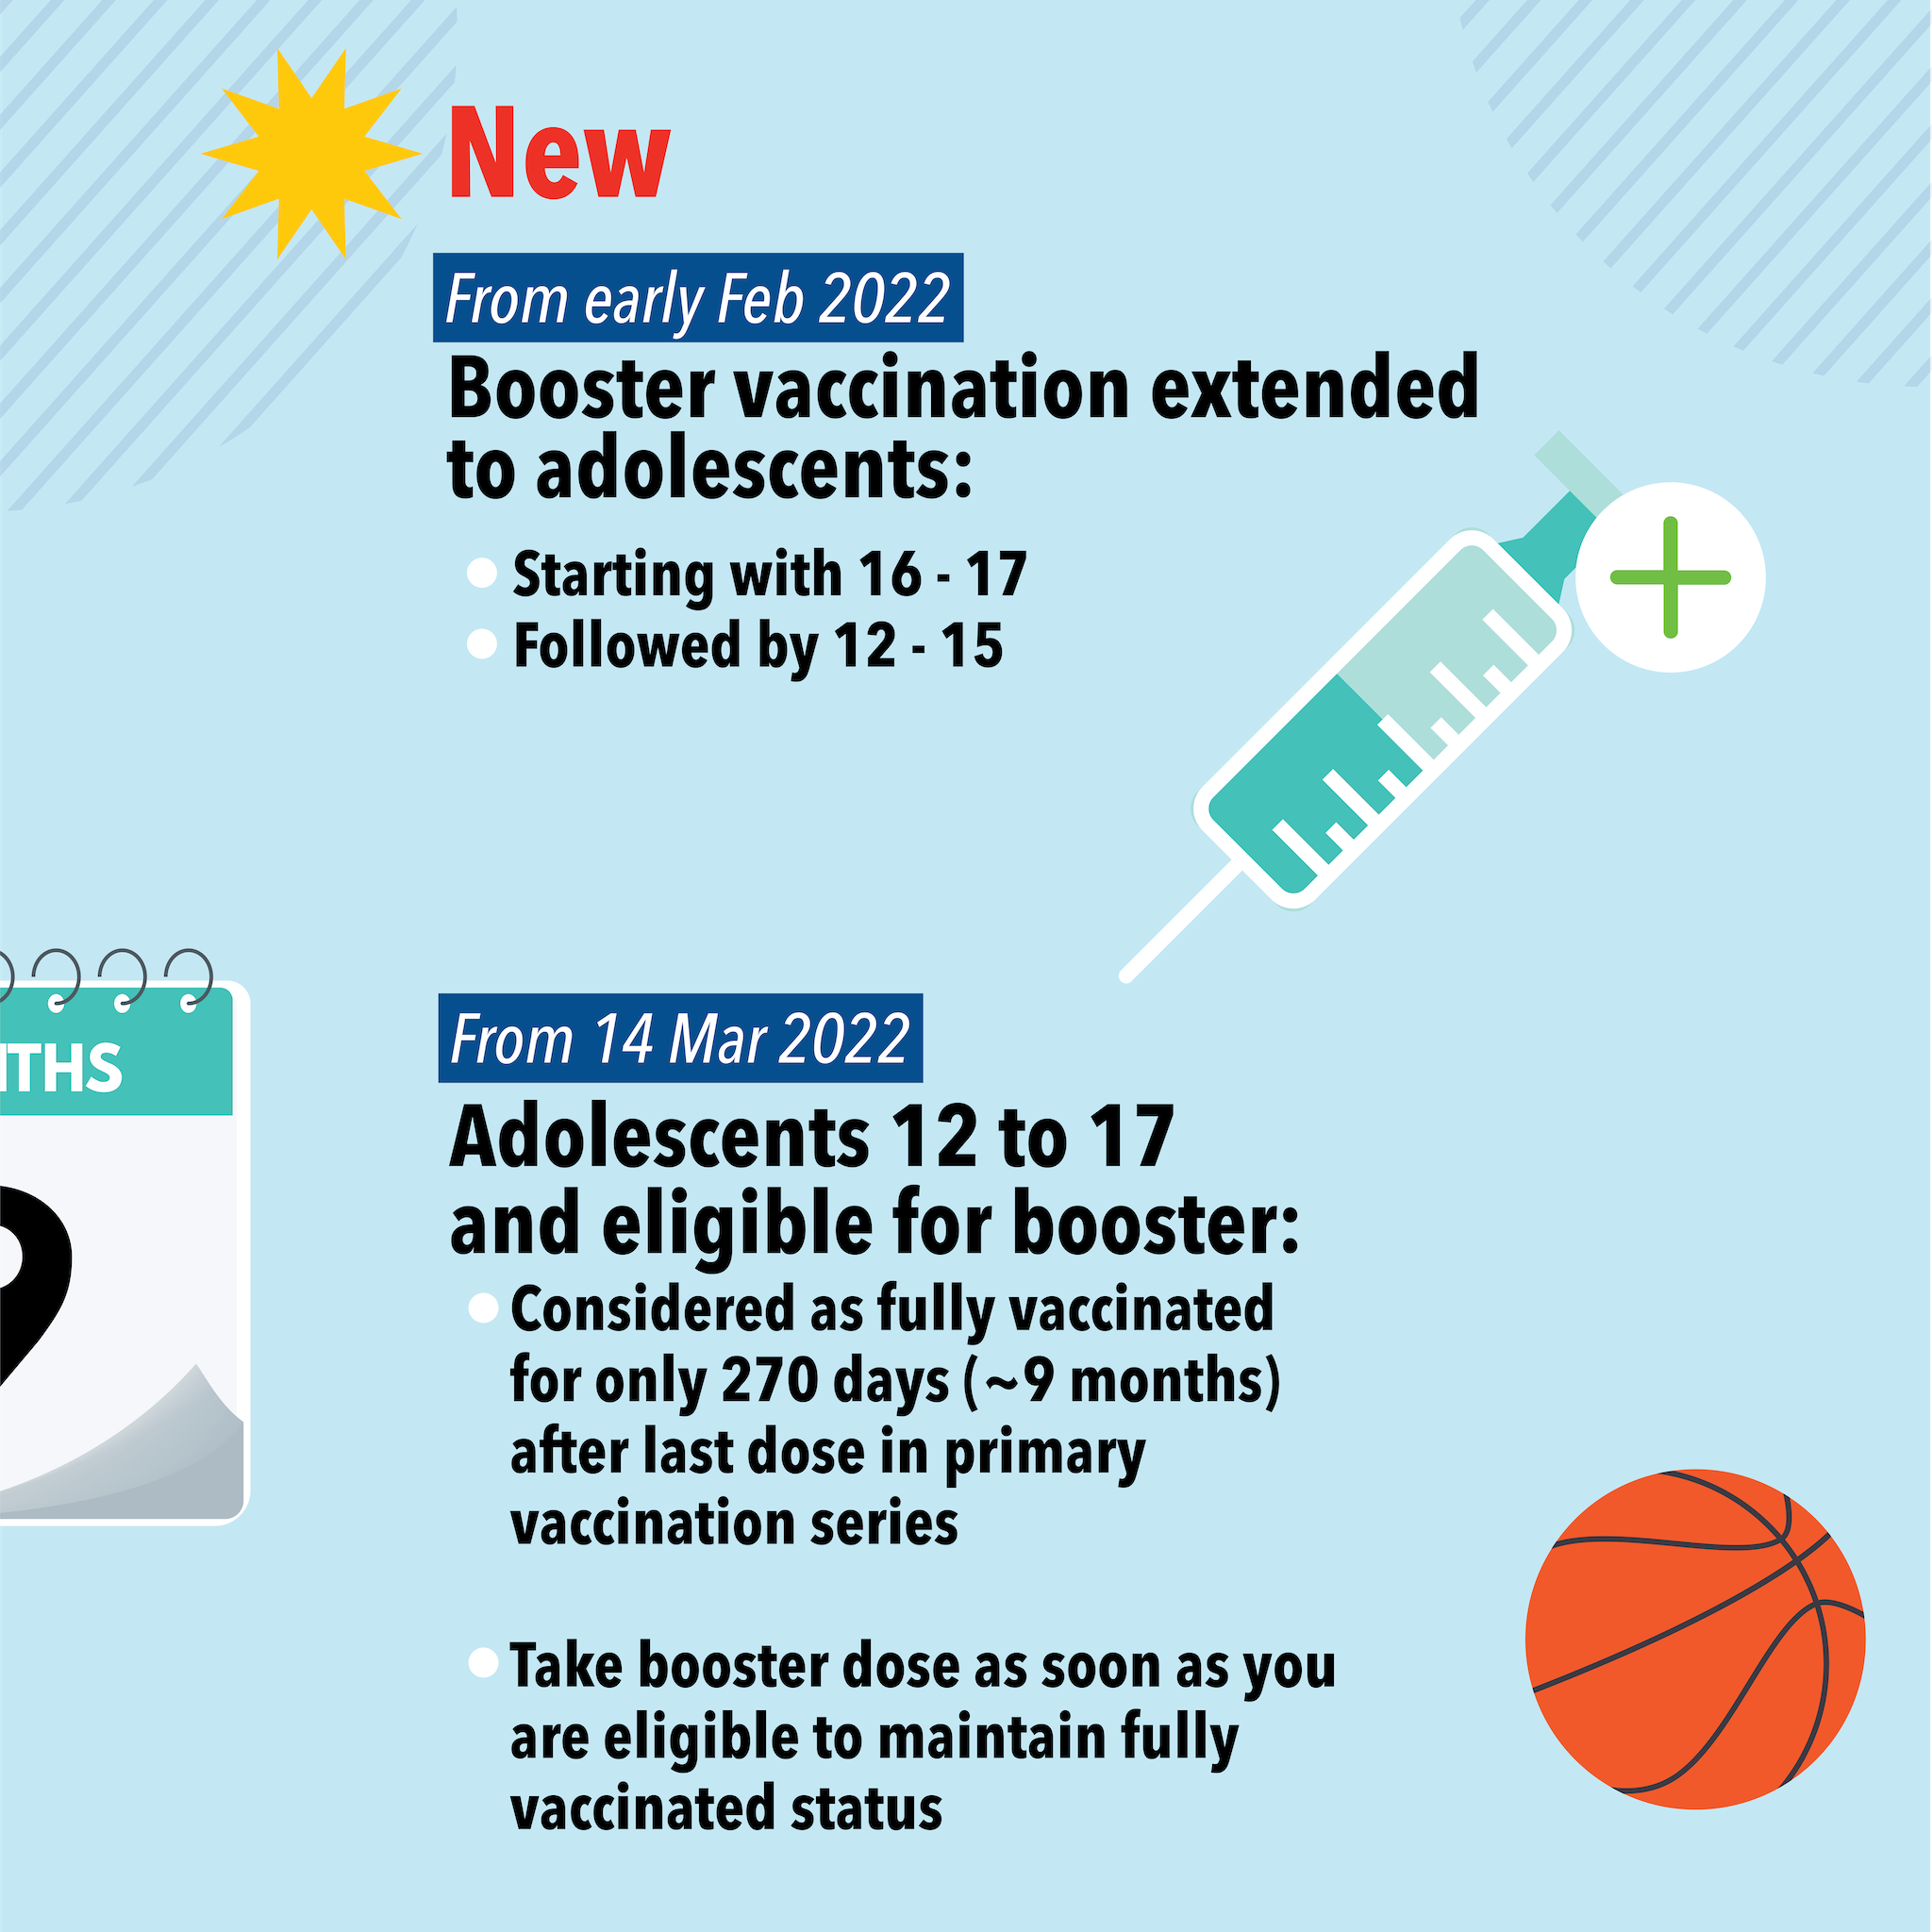 Post vaccine meaning